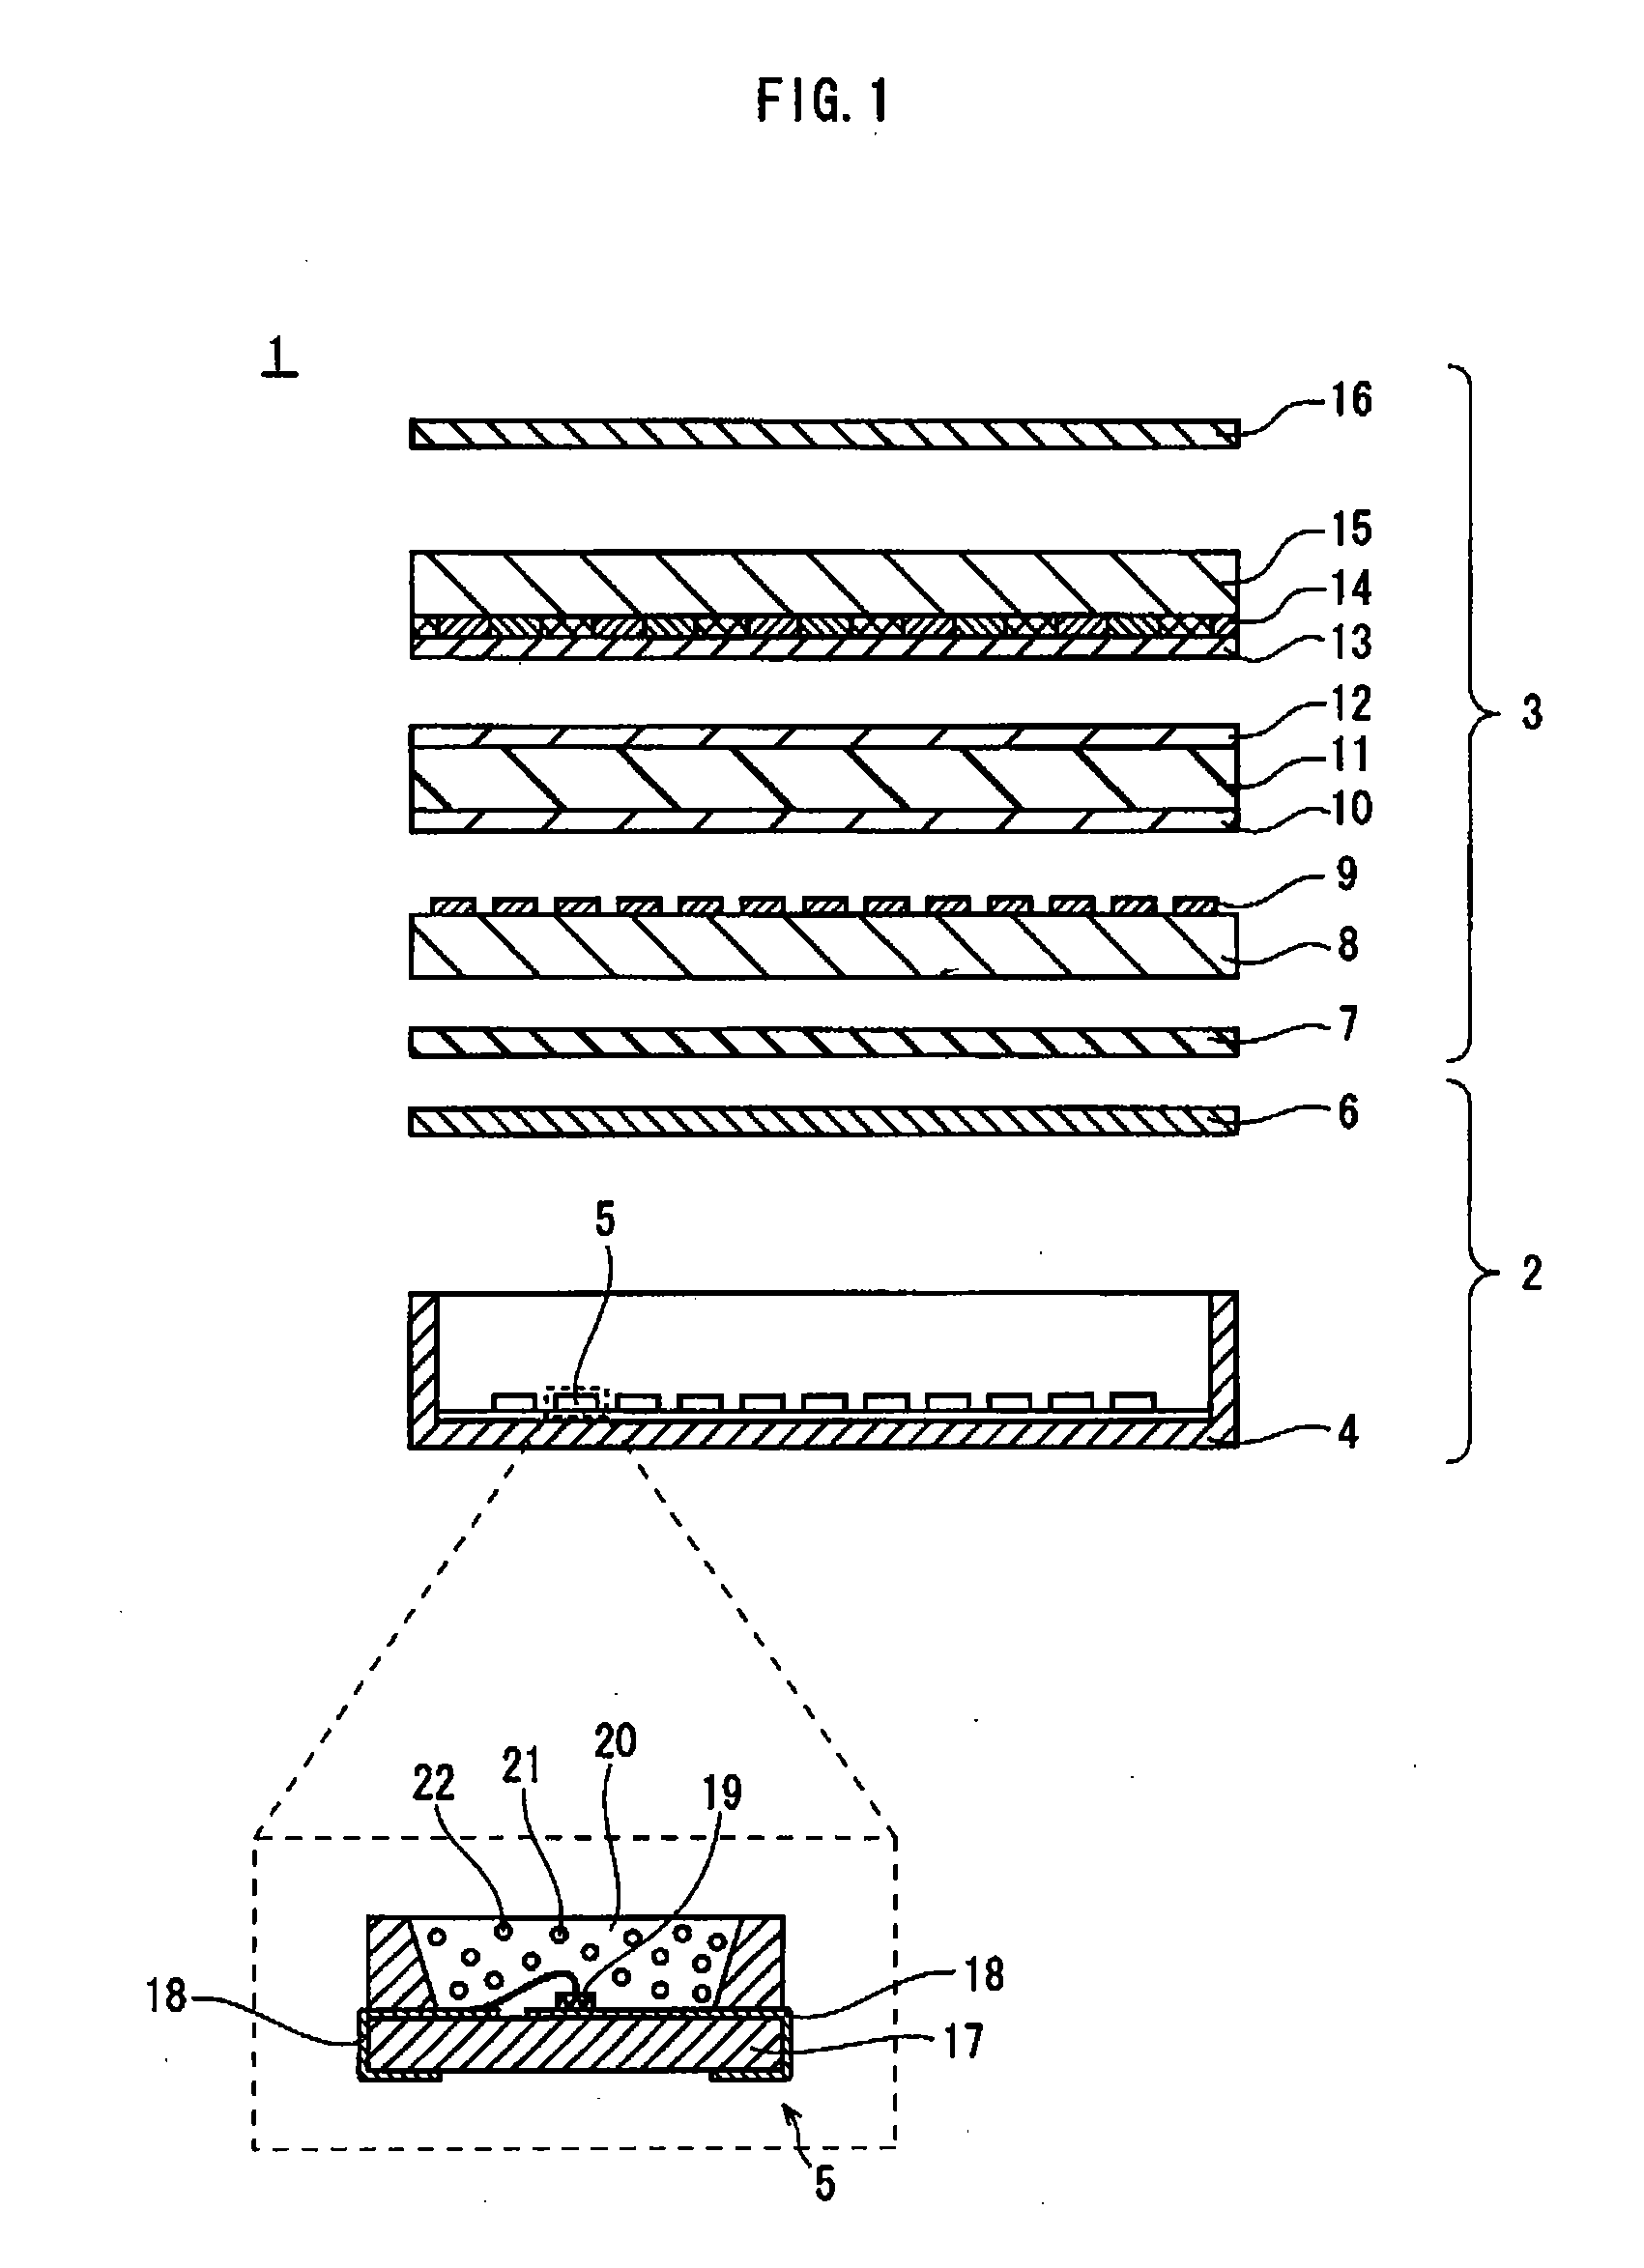 Backlight apparatus, light source for backlight apparatus, and display apparatus using the same